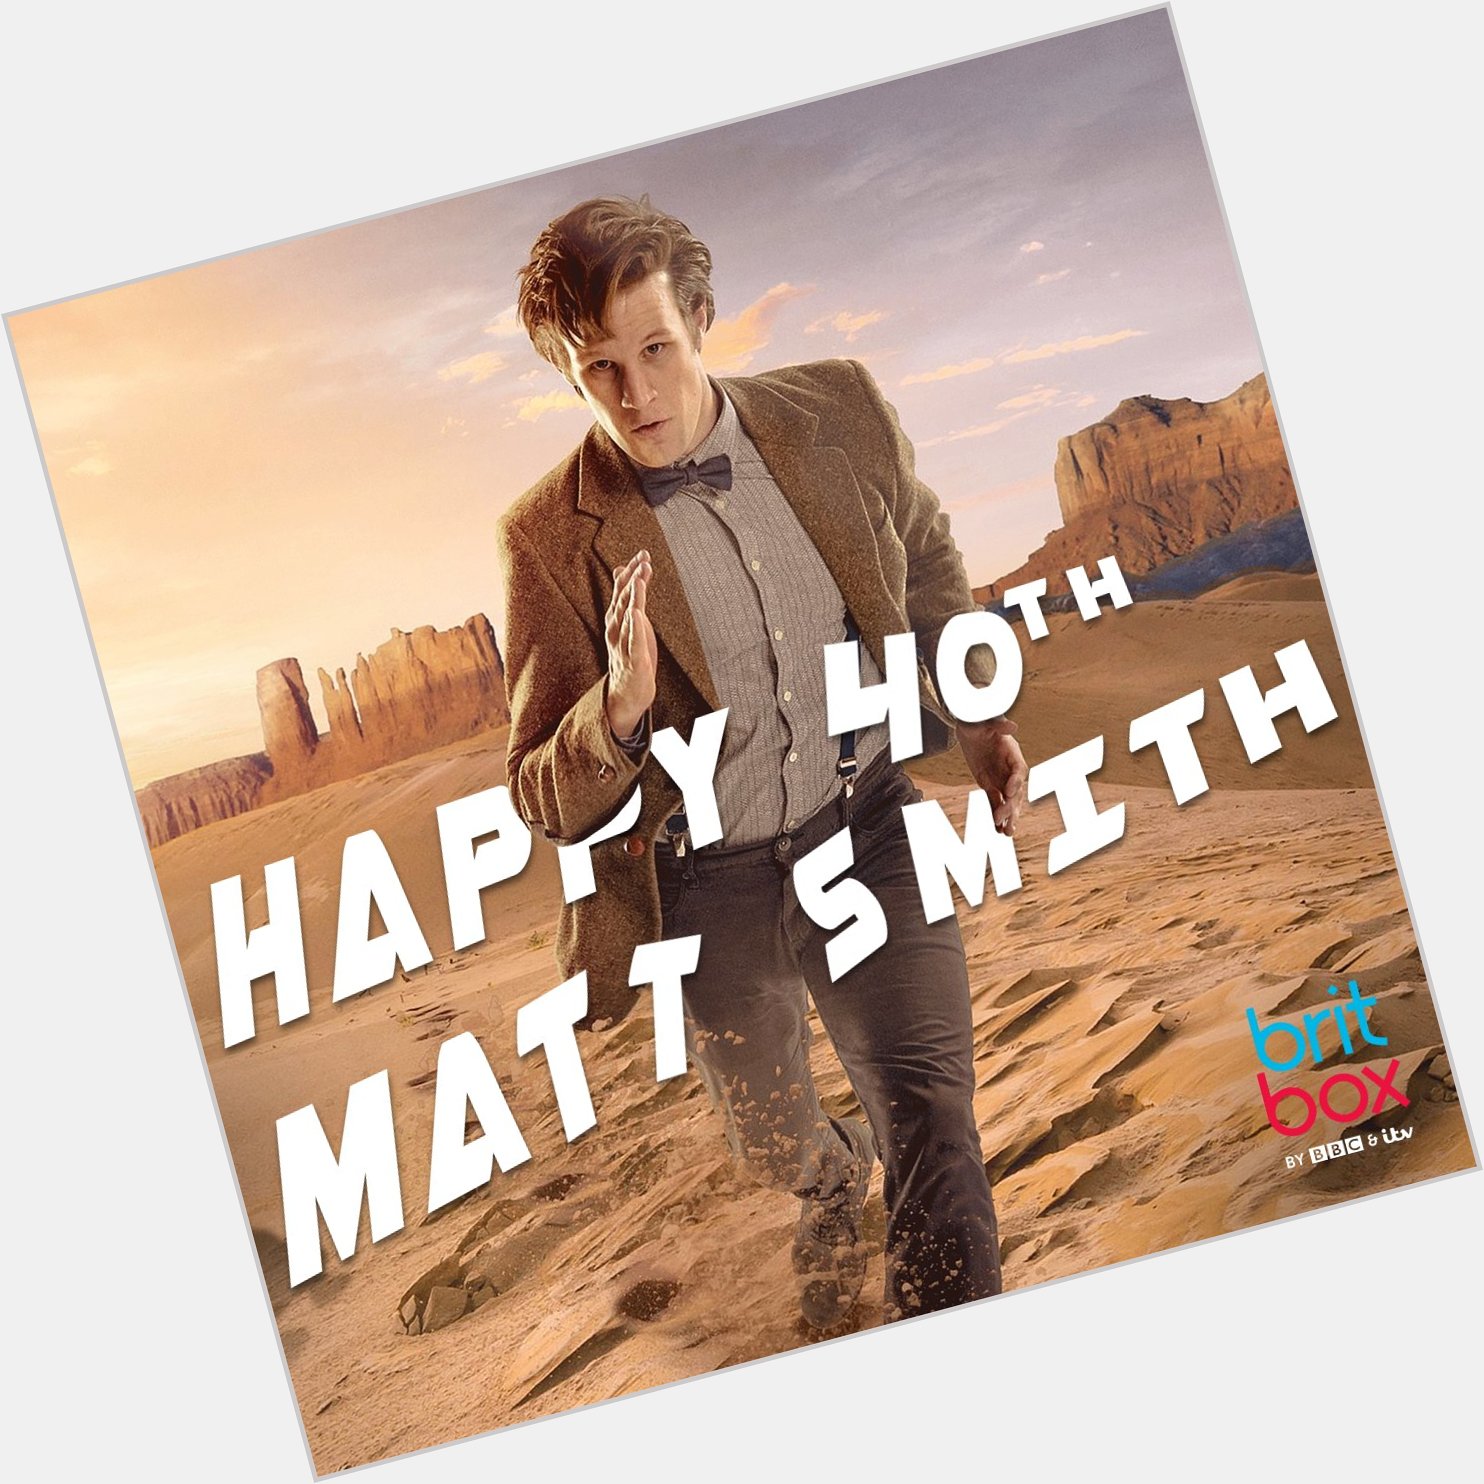 Dragons and Fire? More like Space and Time!
A very special happy birthday to Matt Smith! 